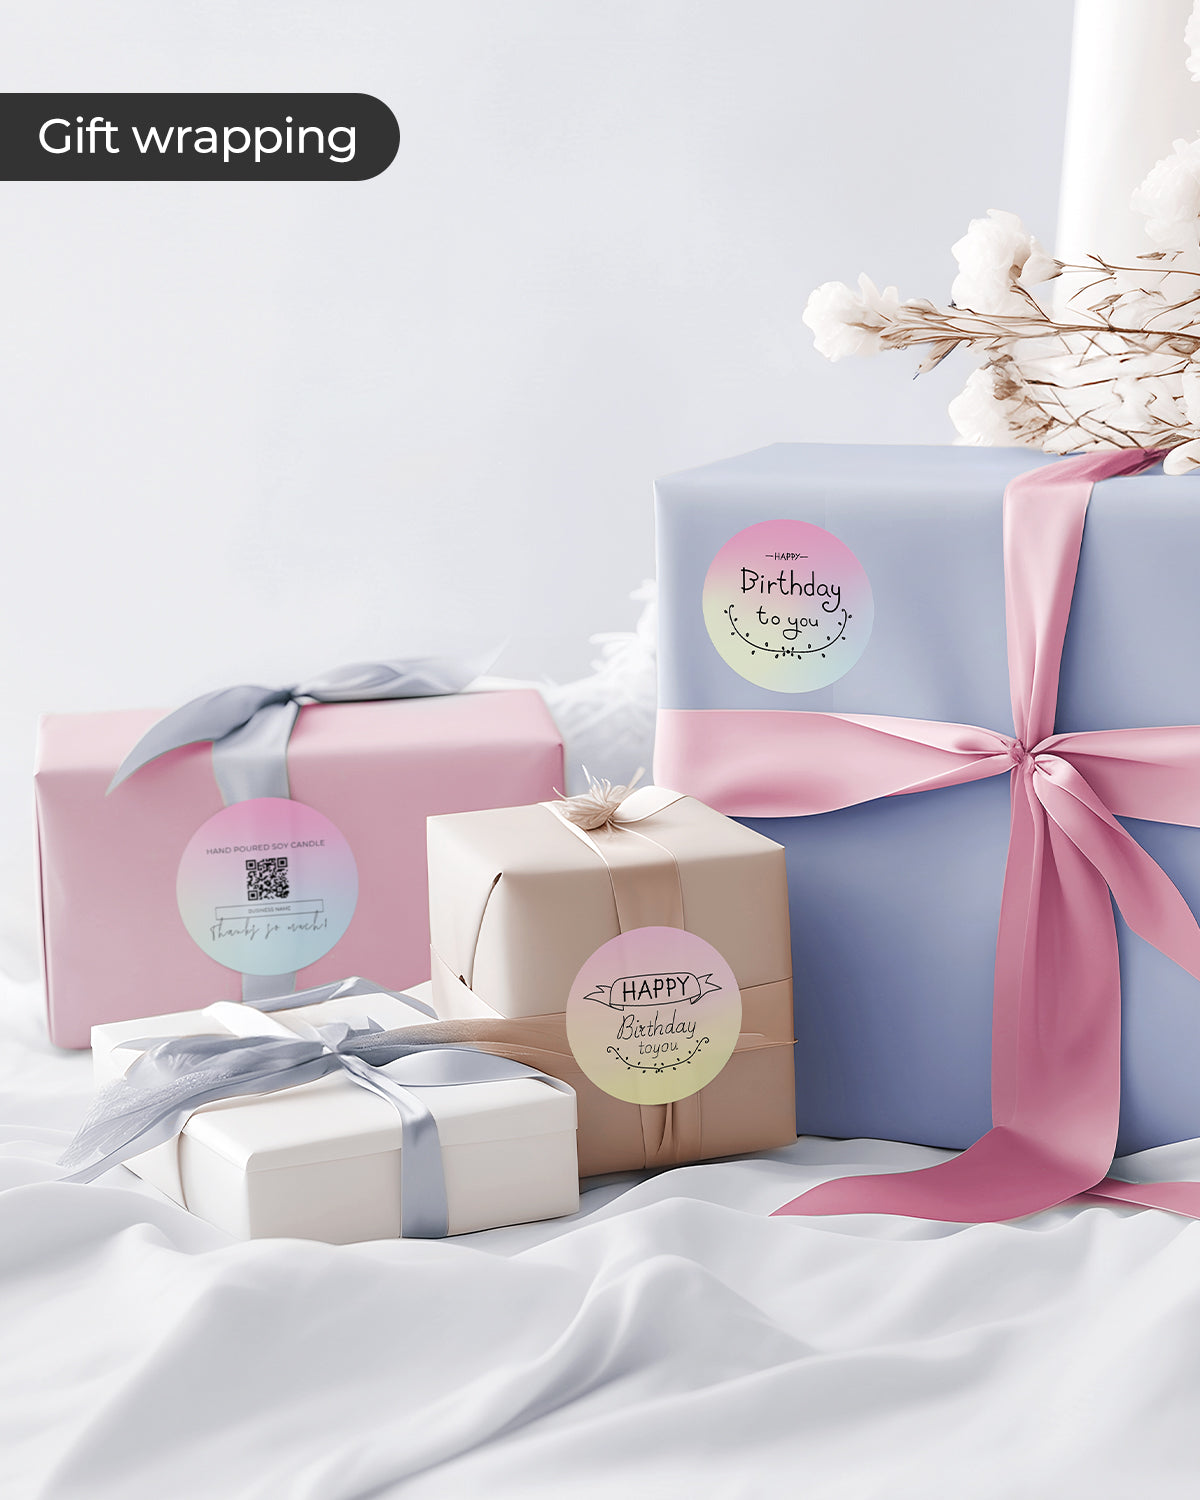 Personalize your gift wrapping or add a charming touch to thank you notes with these vivid gradient labels.